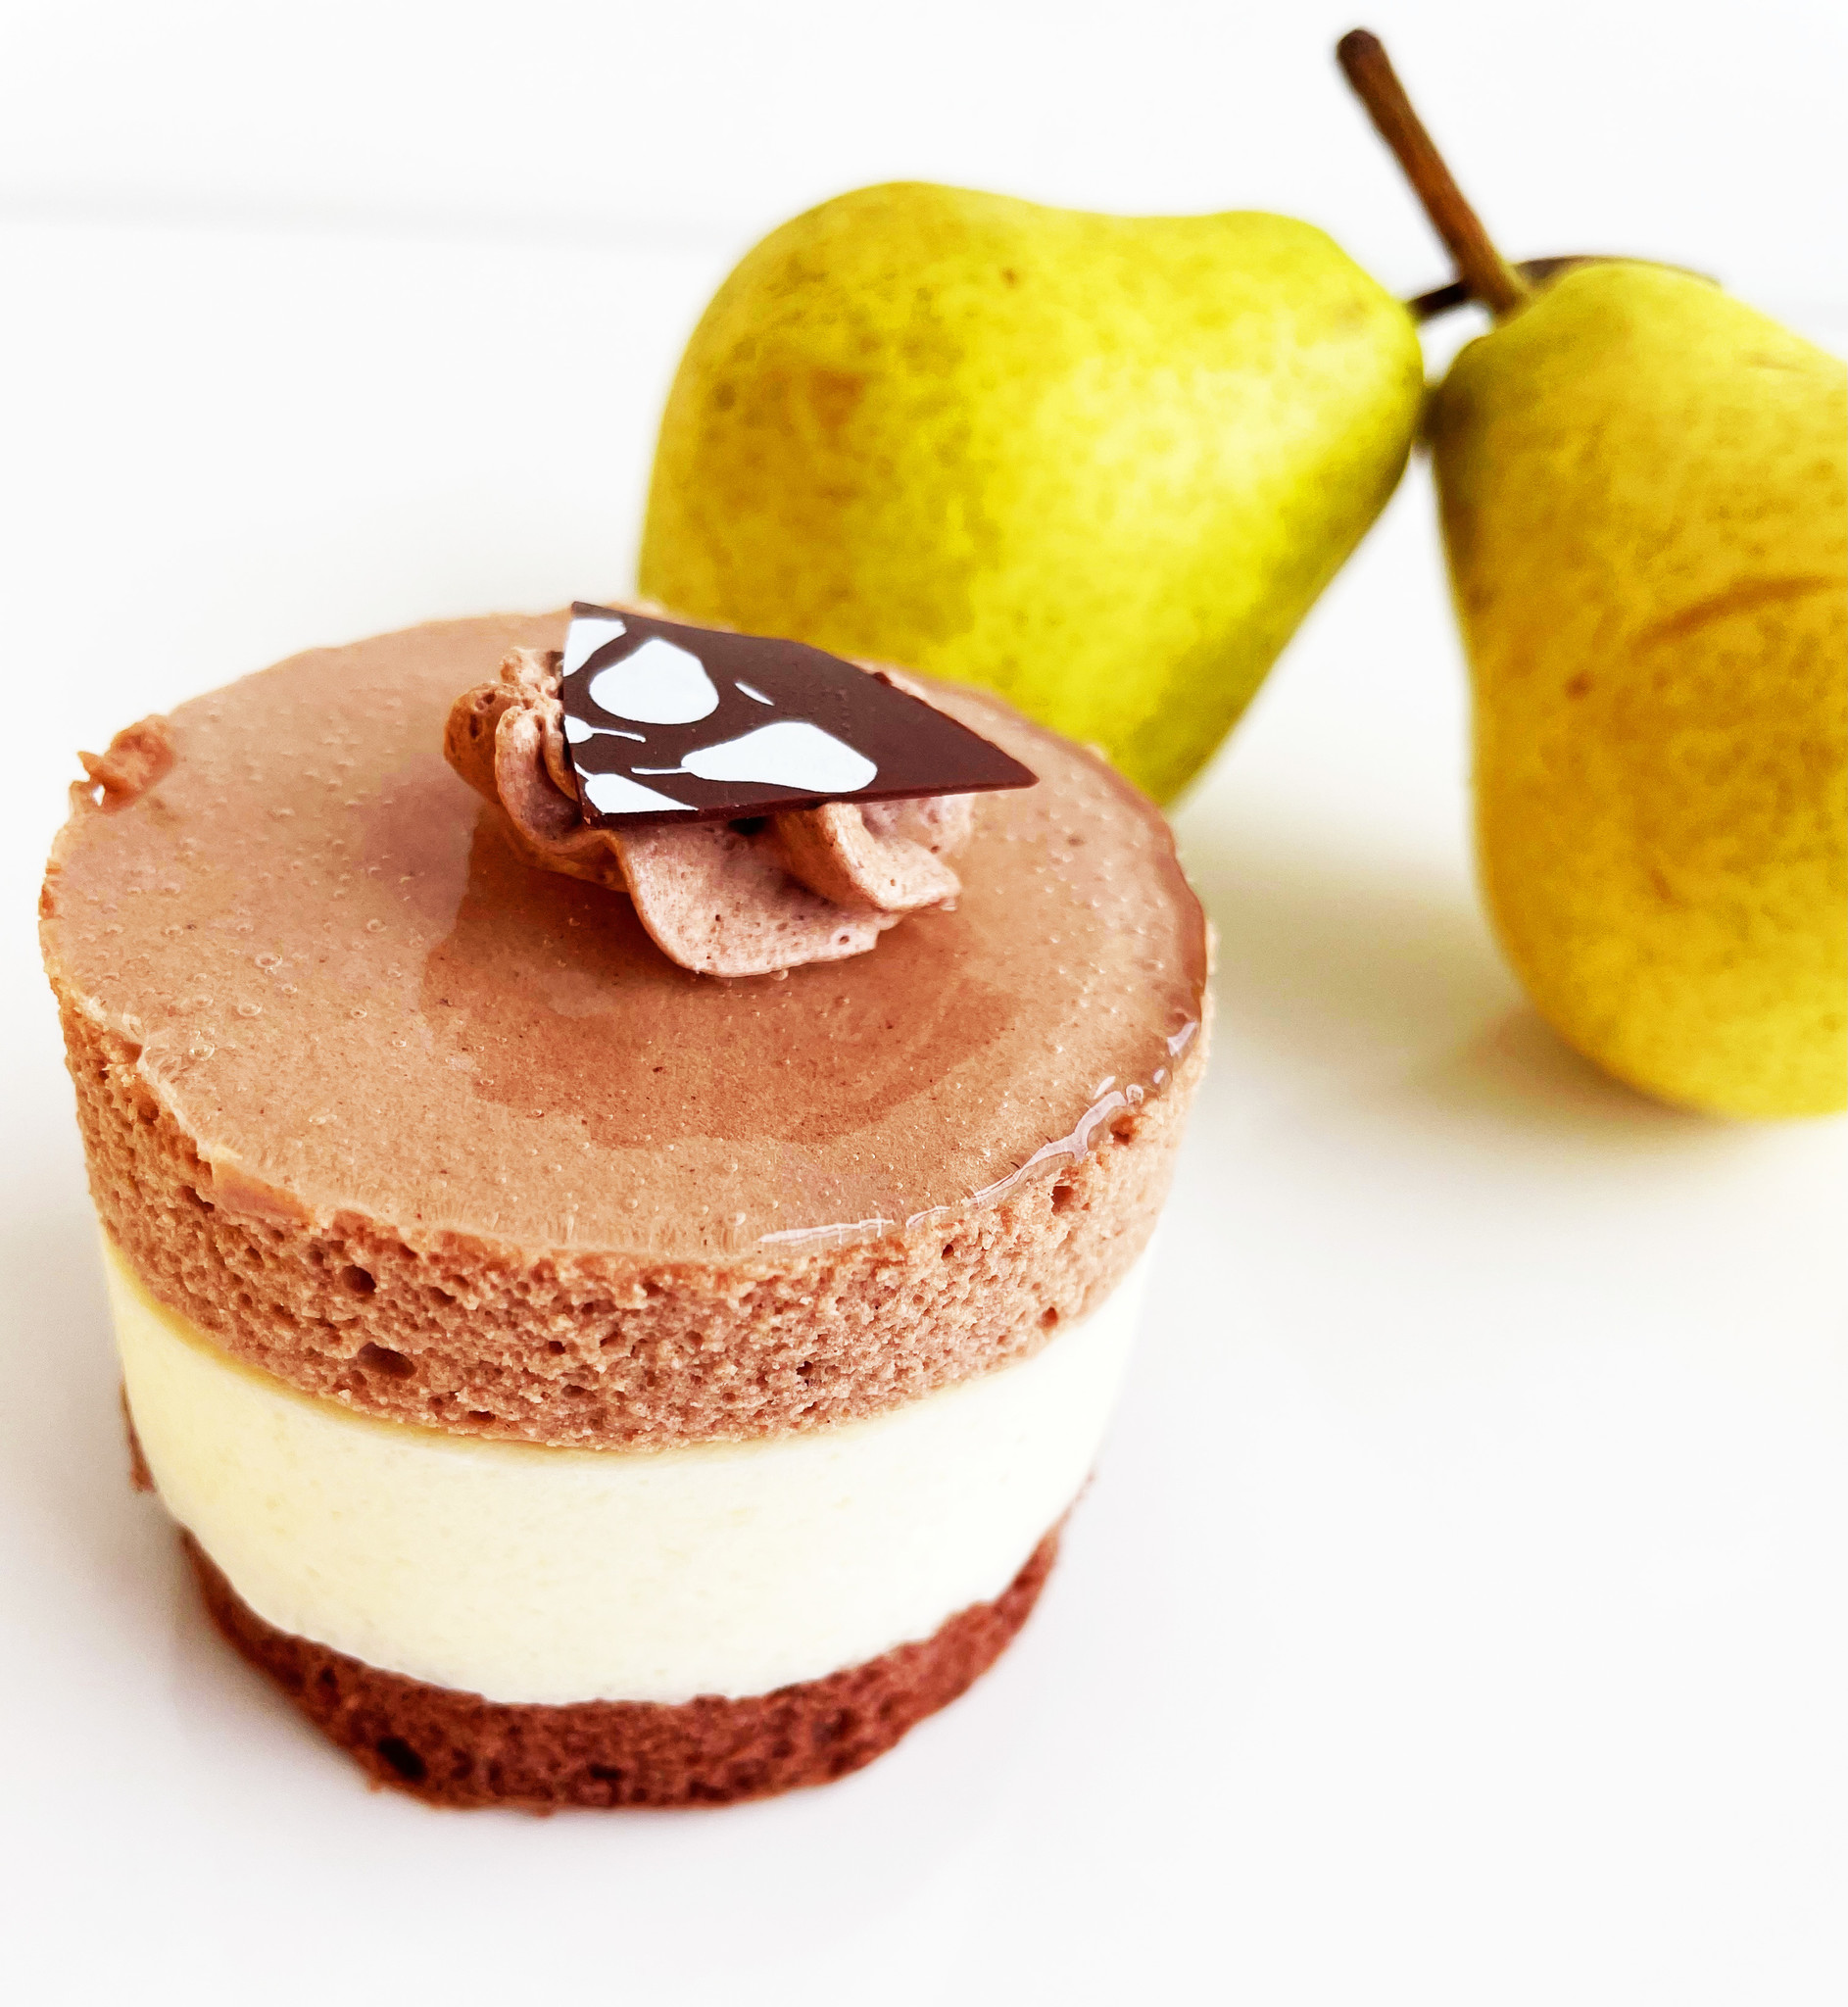 Pear & chocolate mousse cake